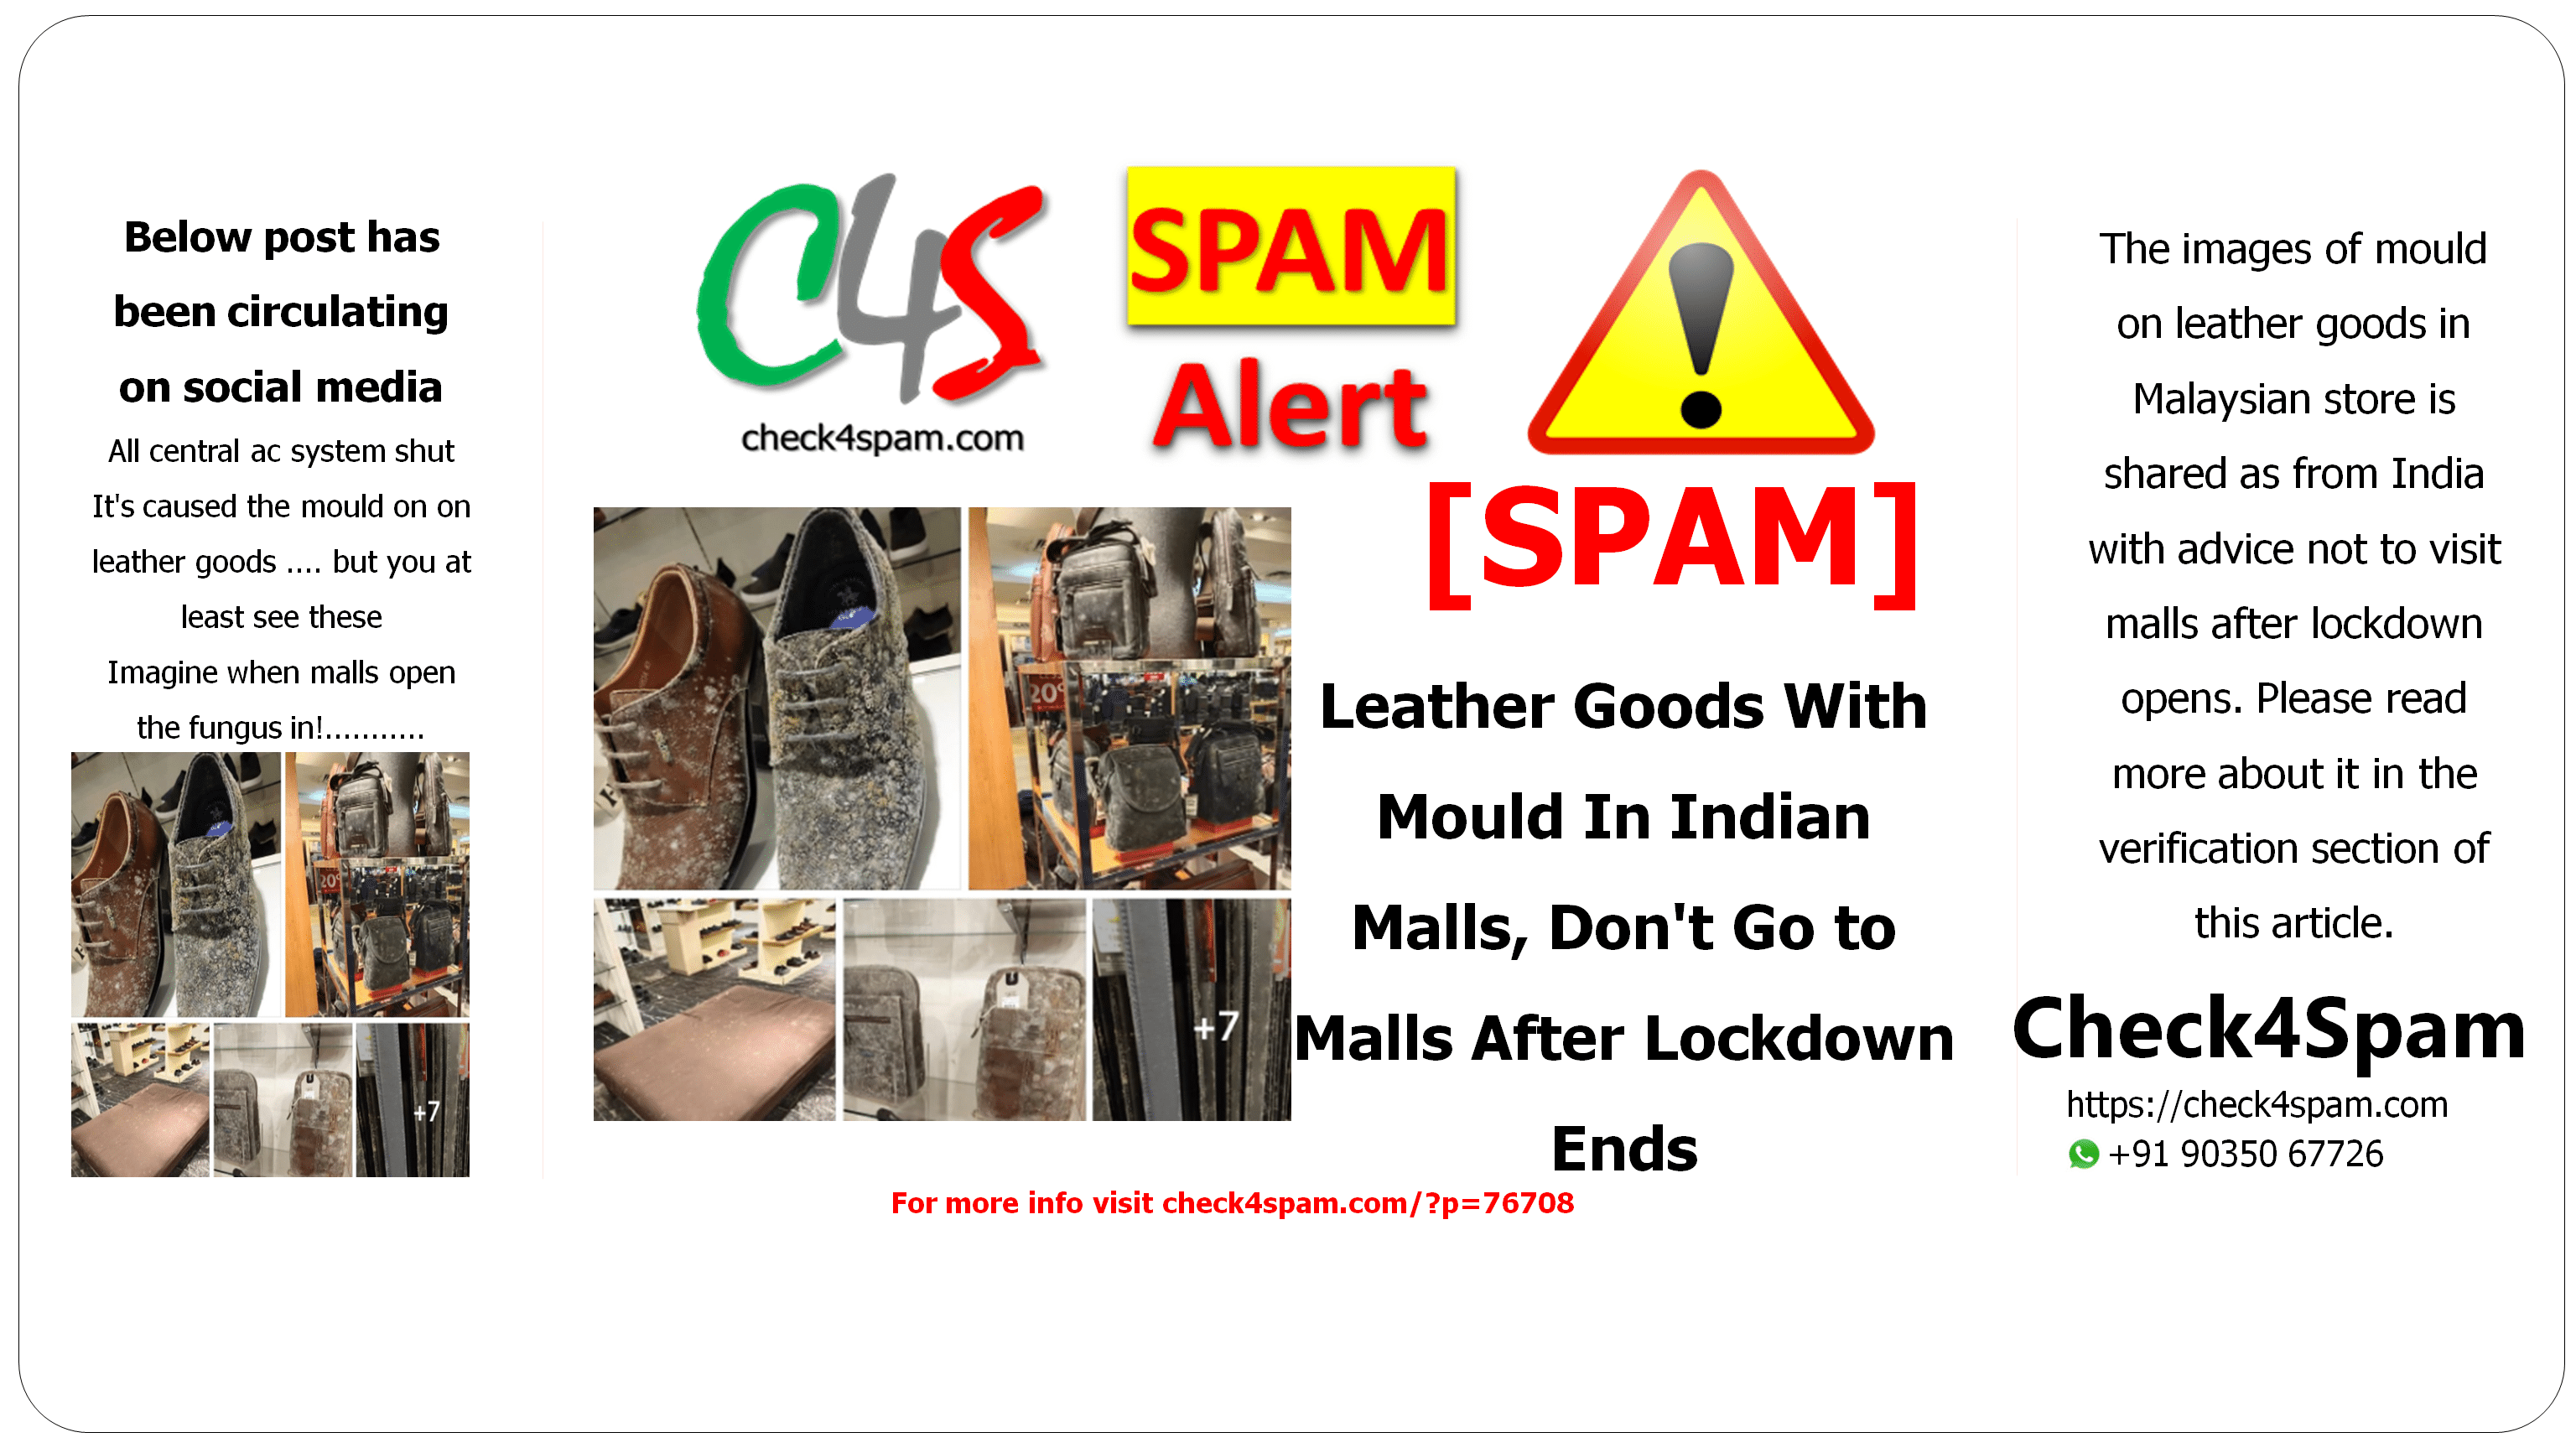 Leather Goods With Mould In Indian Malls, Don't Go to Malls After Lockdown Ends